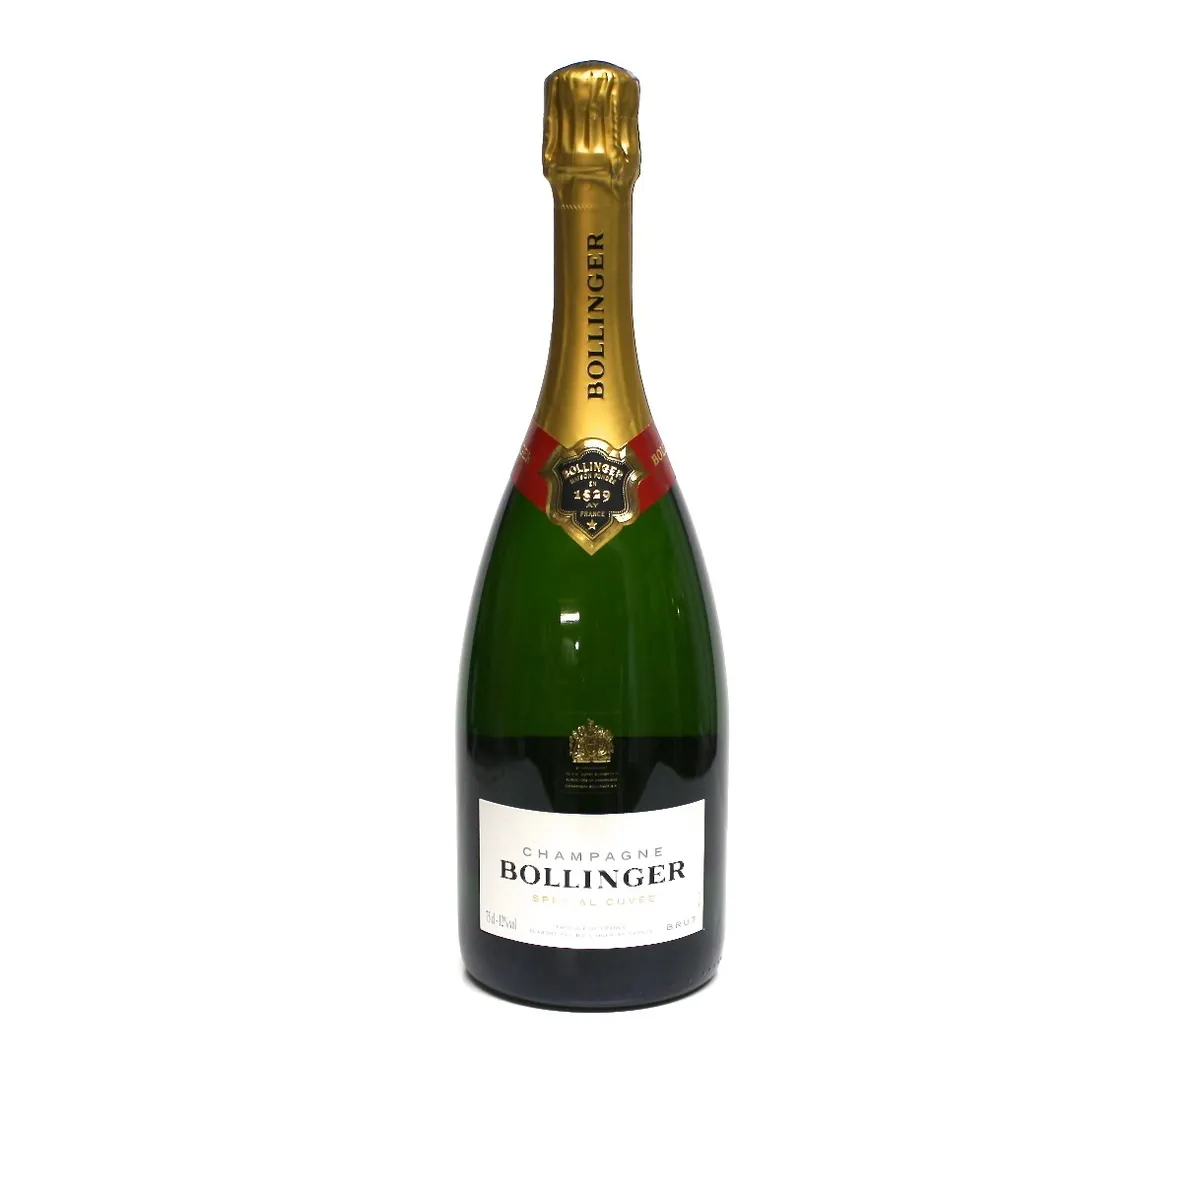 CHAMPAGNE BOLLINGER SPECIALE CUVEE 75CL 